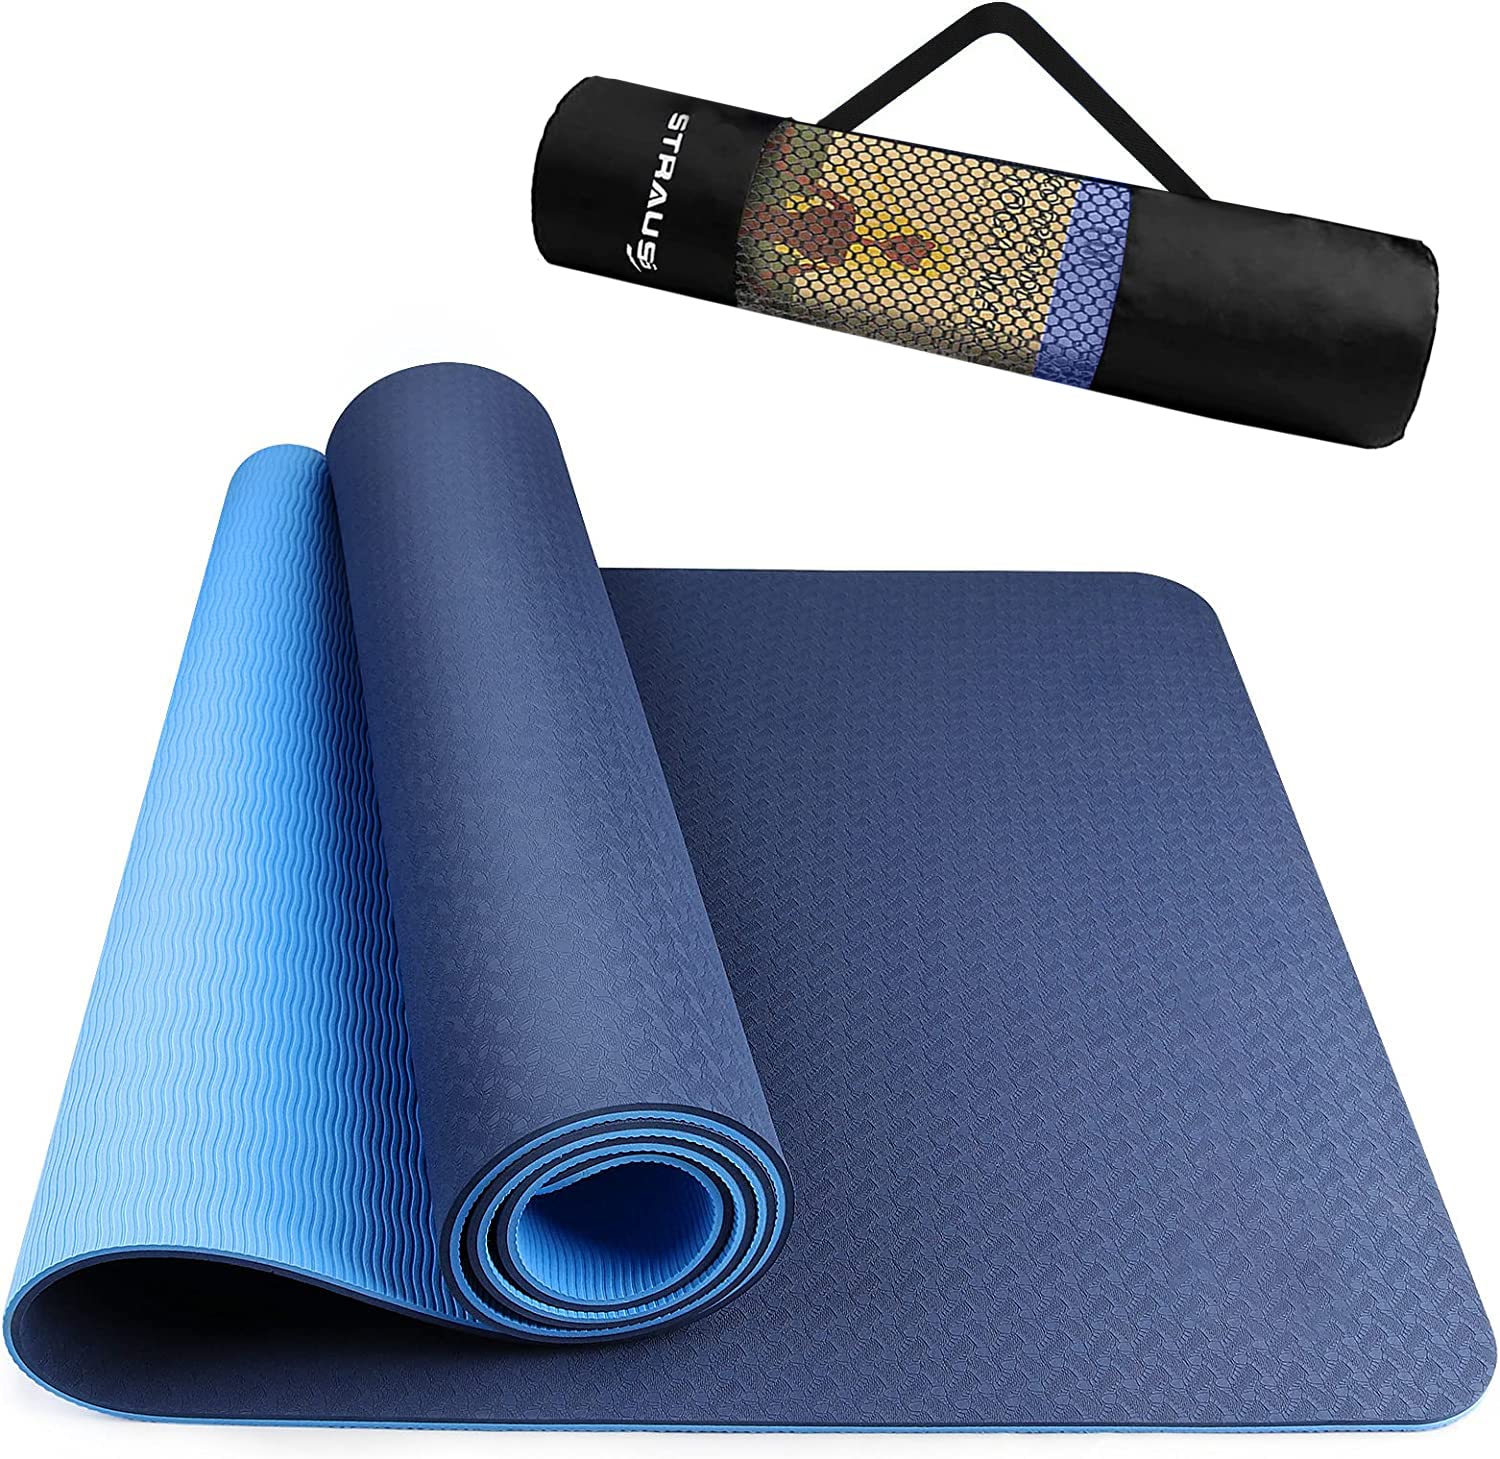 Buy Strauss 1730x610x8mm Blue PVC Floral Yoga Mat with Cover, ST